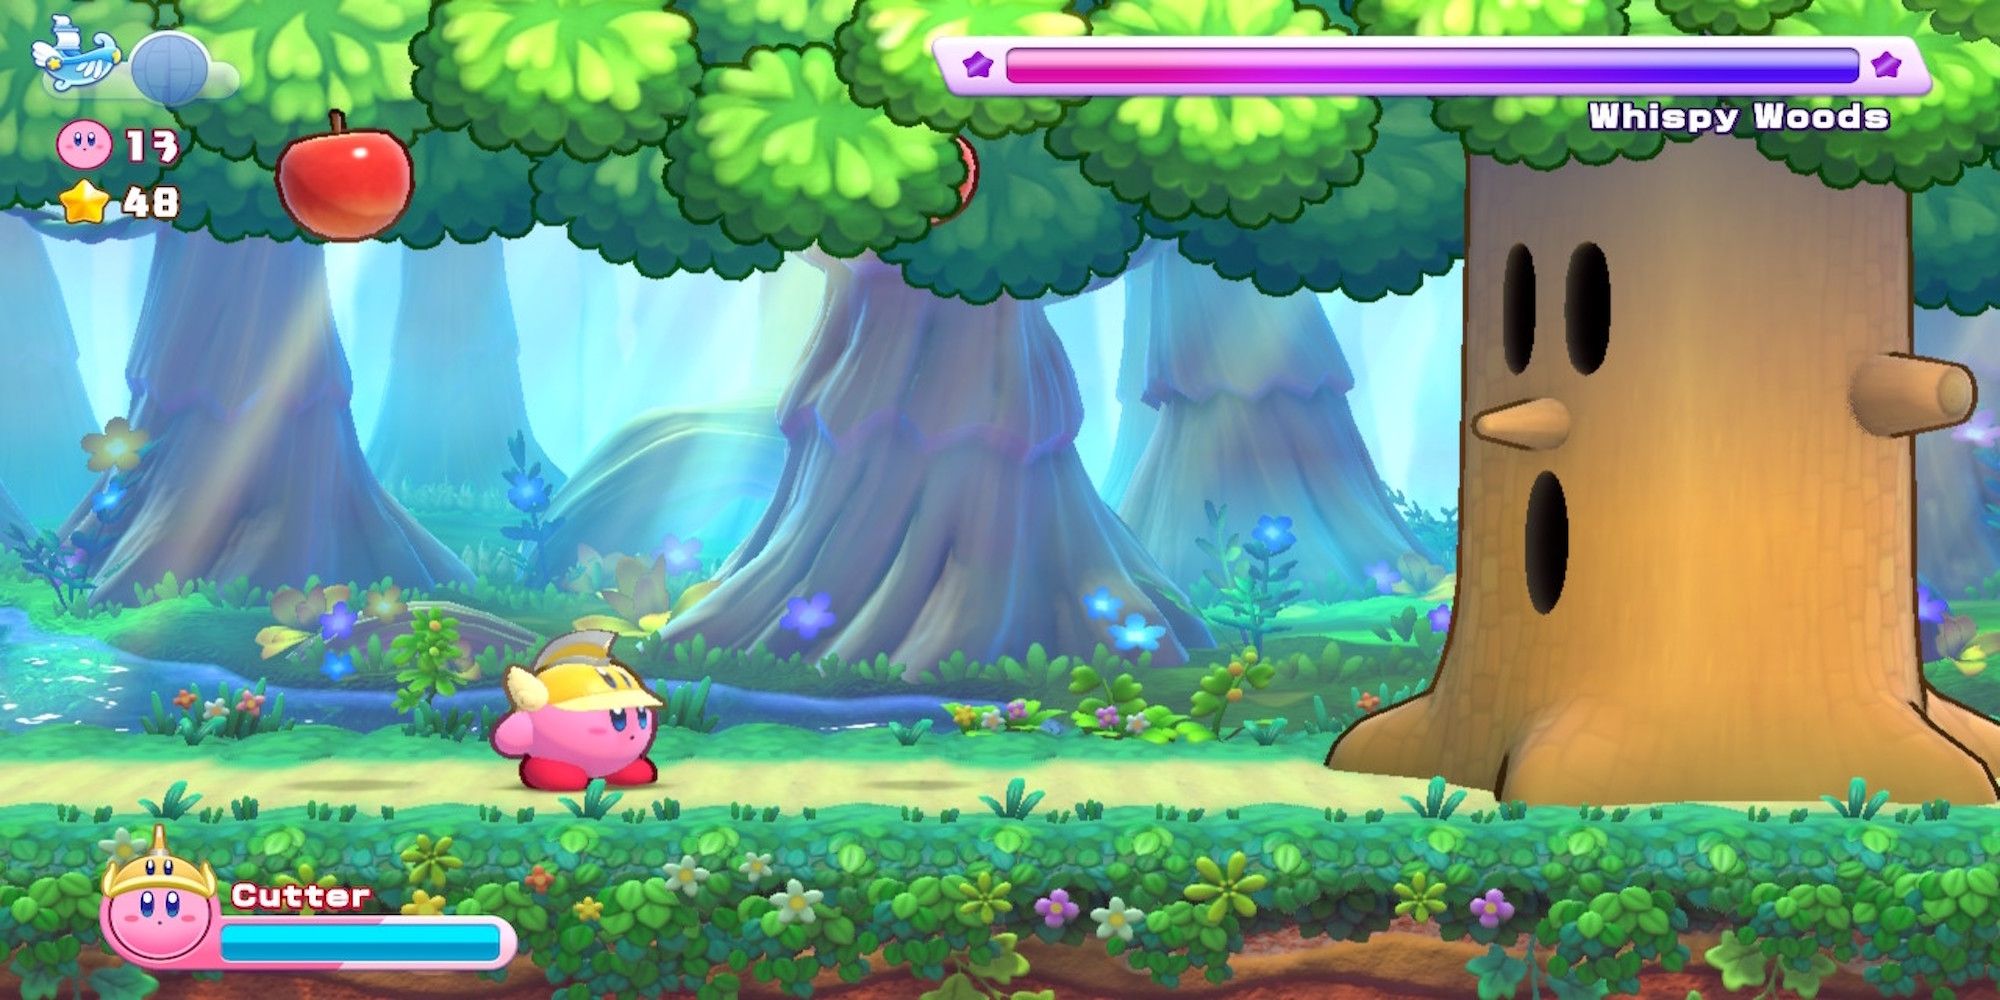 Fighting a boss in Kirby's Return to Dream Land Deluxe